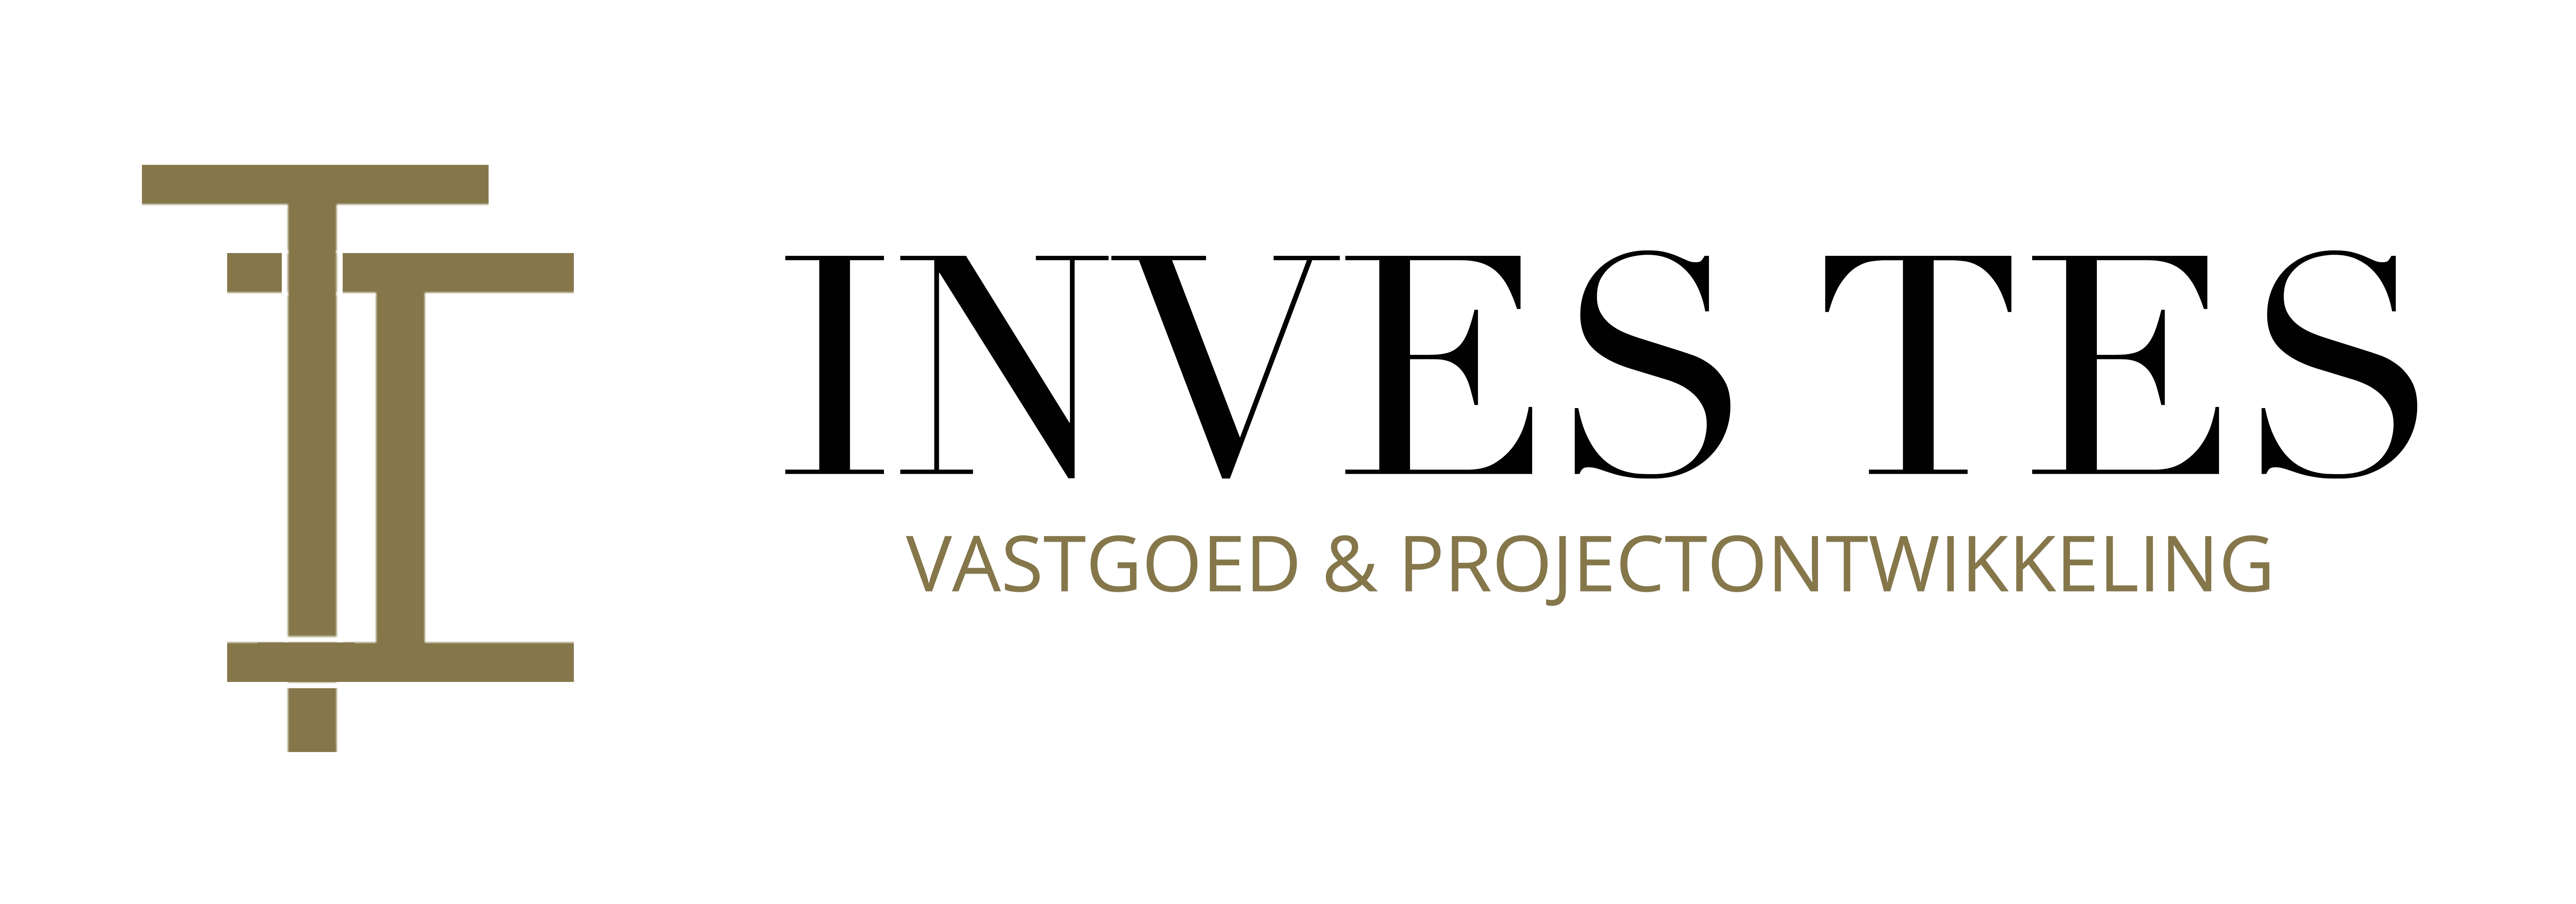 Investes Group Vastgoed & Projectontwikkeling